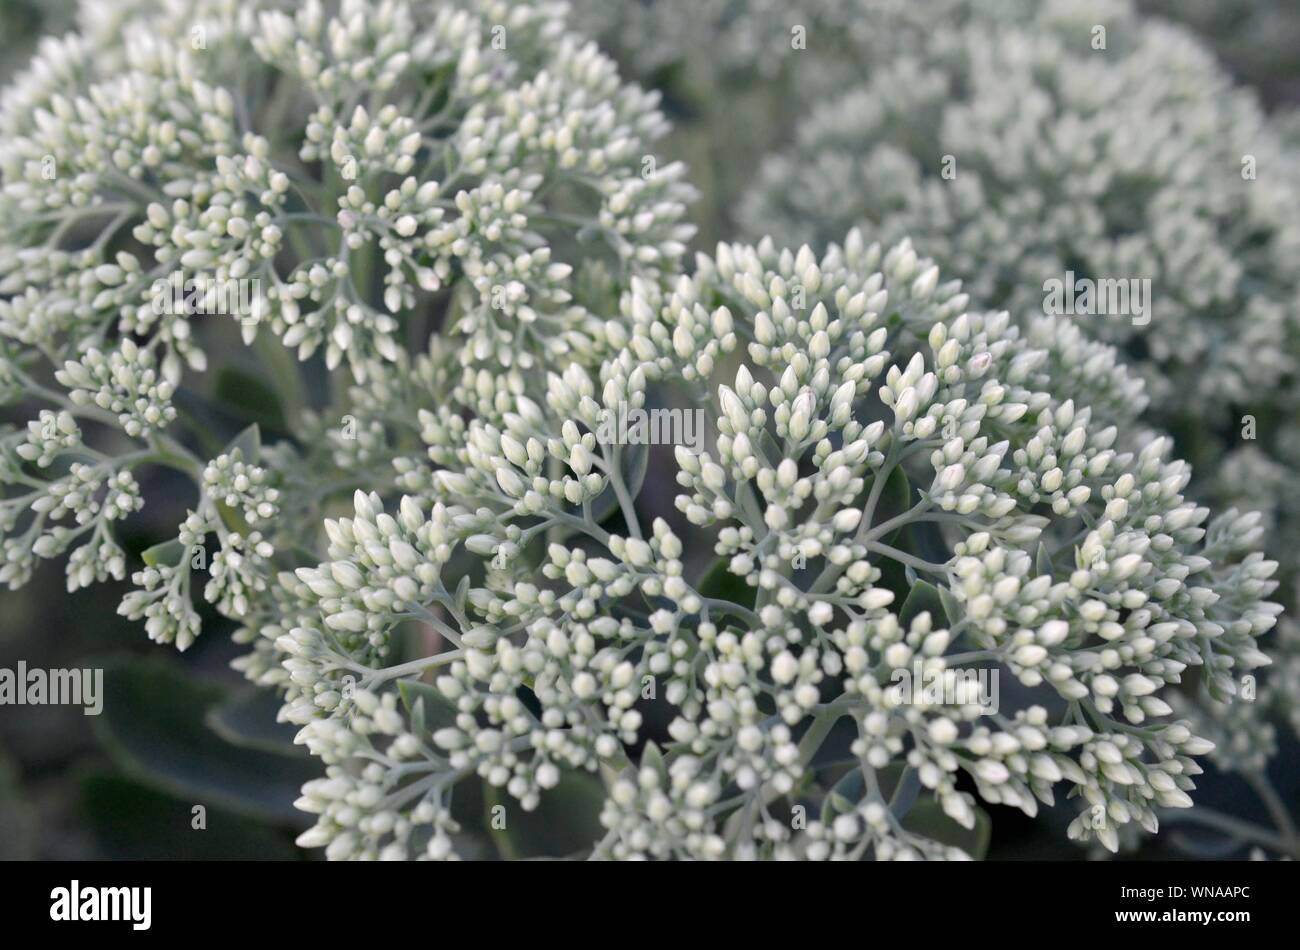 Lot of blooming Hylotelephium telephium white flowers with green leaves and stems. Inflorescence of garden flowers Stock Photo